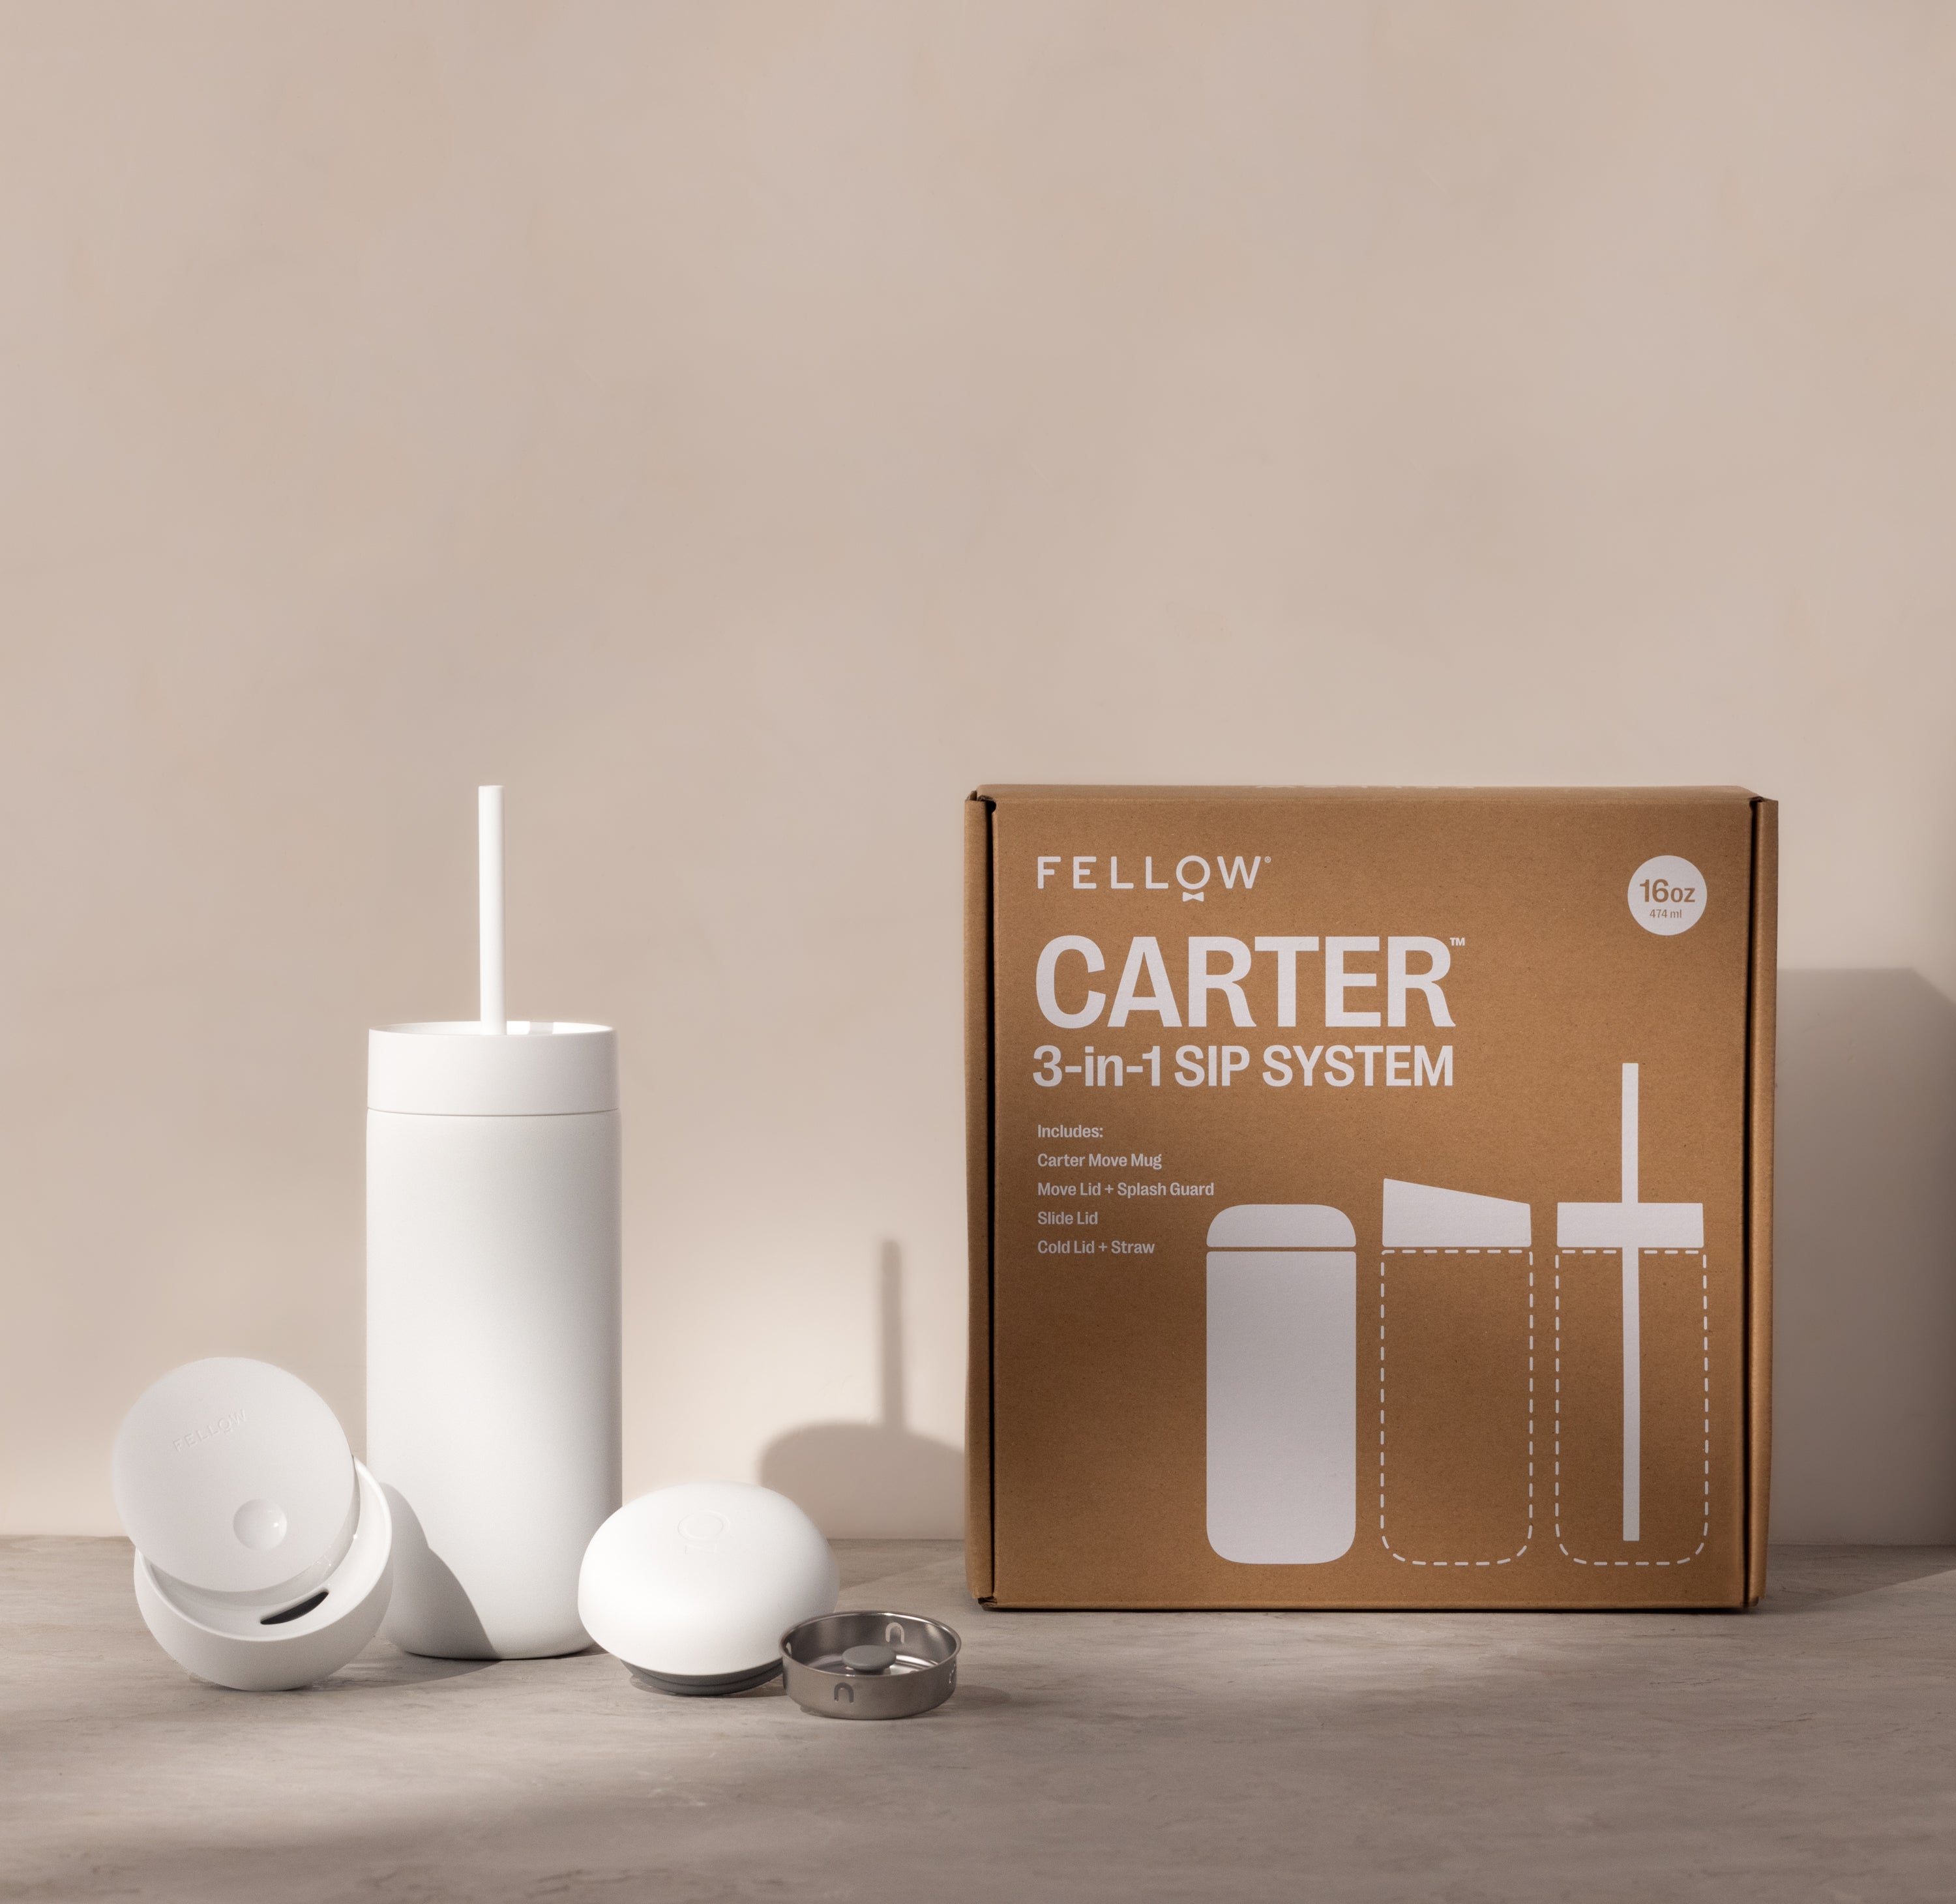 Fellow Carter Move 3-in1 Sip System Bundle